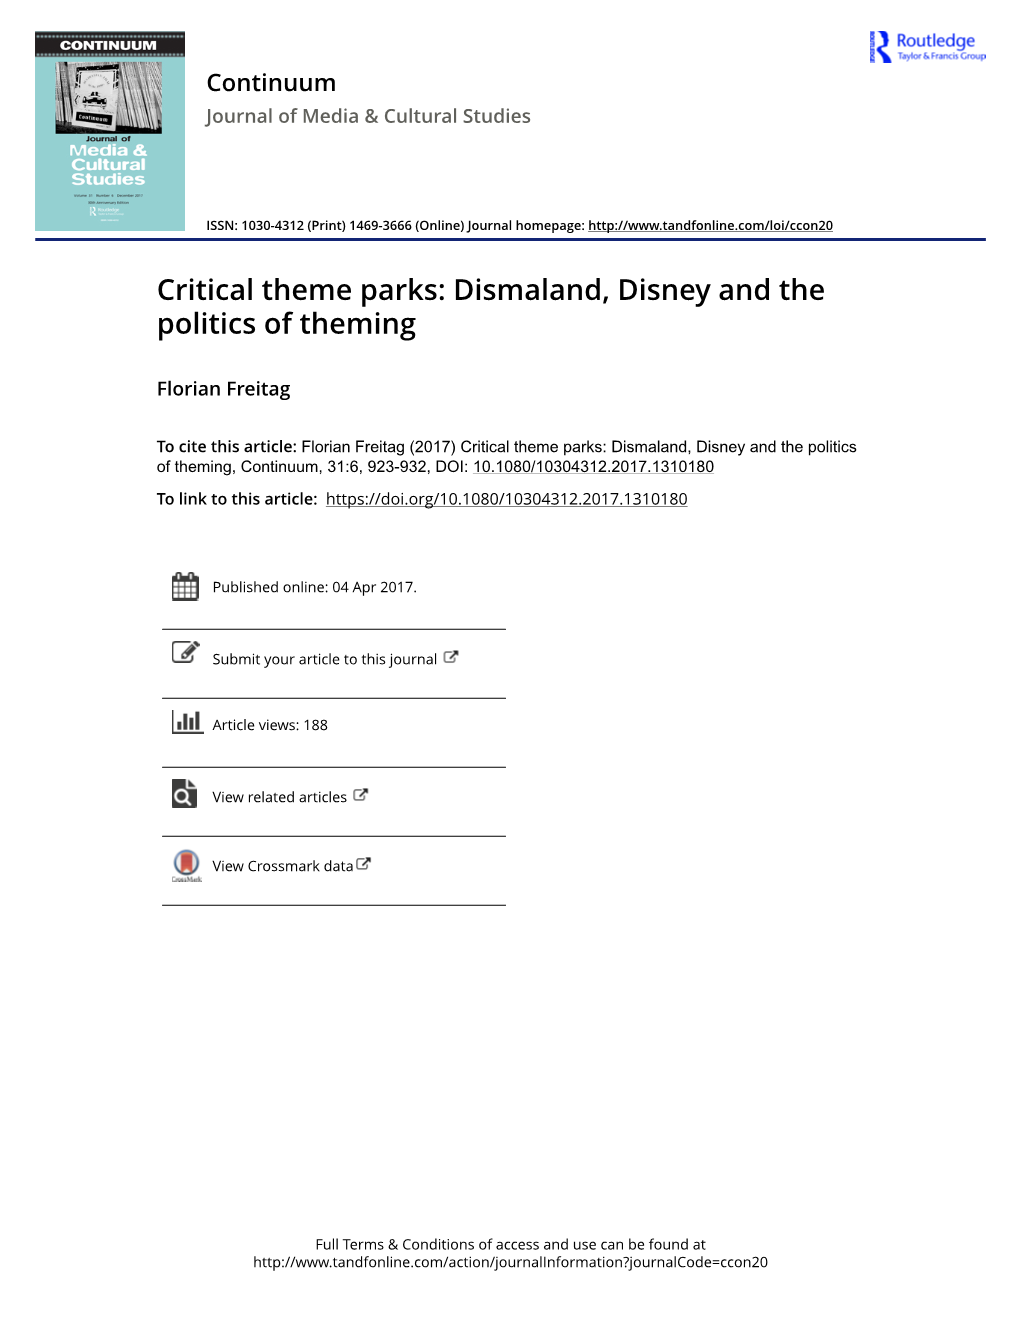 Critical Theme Parks: Dismaland, Disney and the Politics of Theming